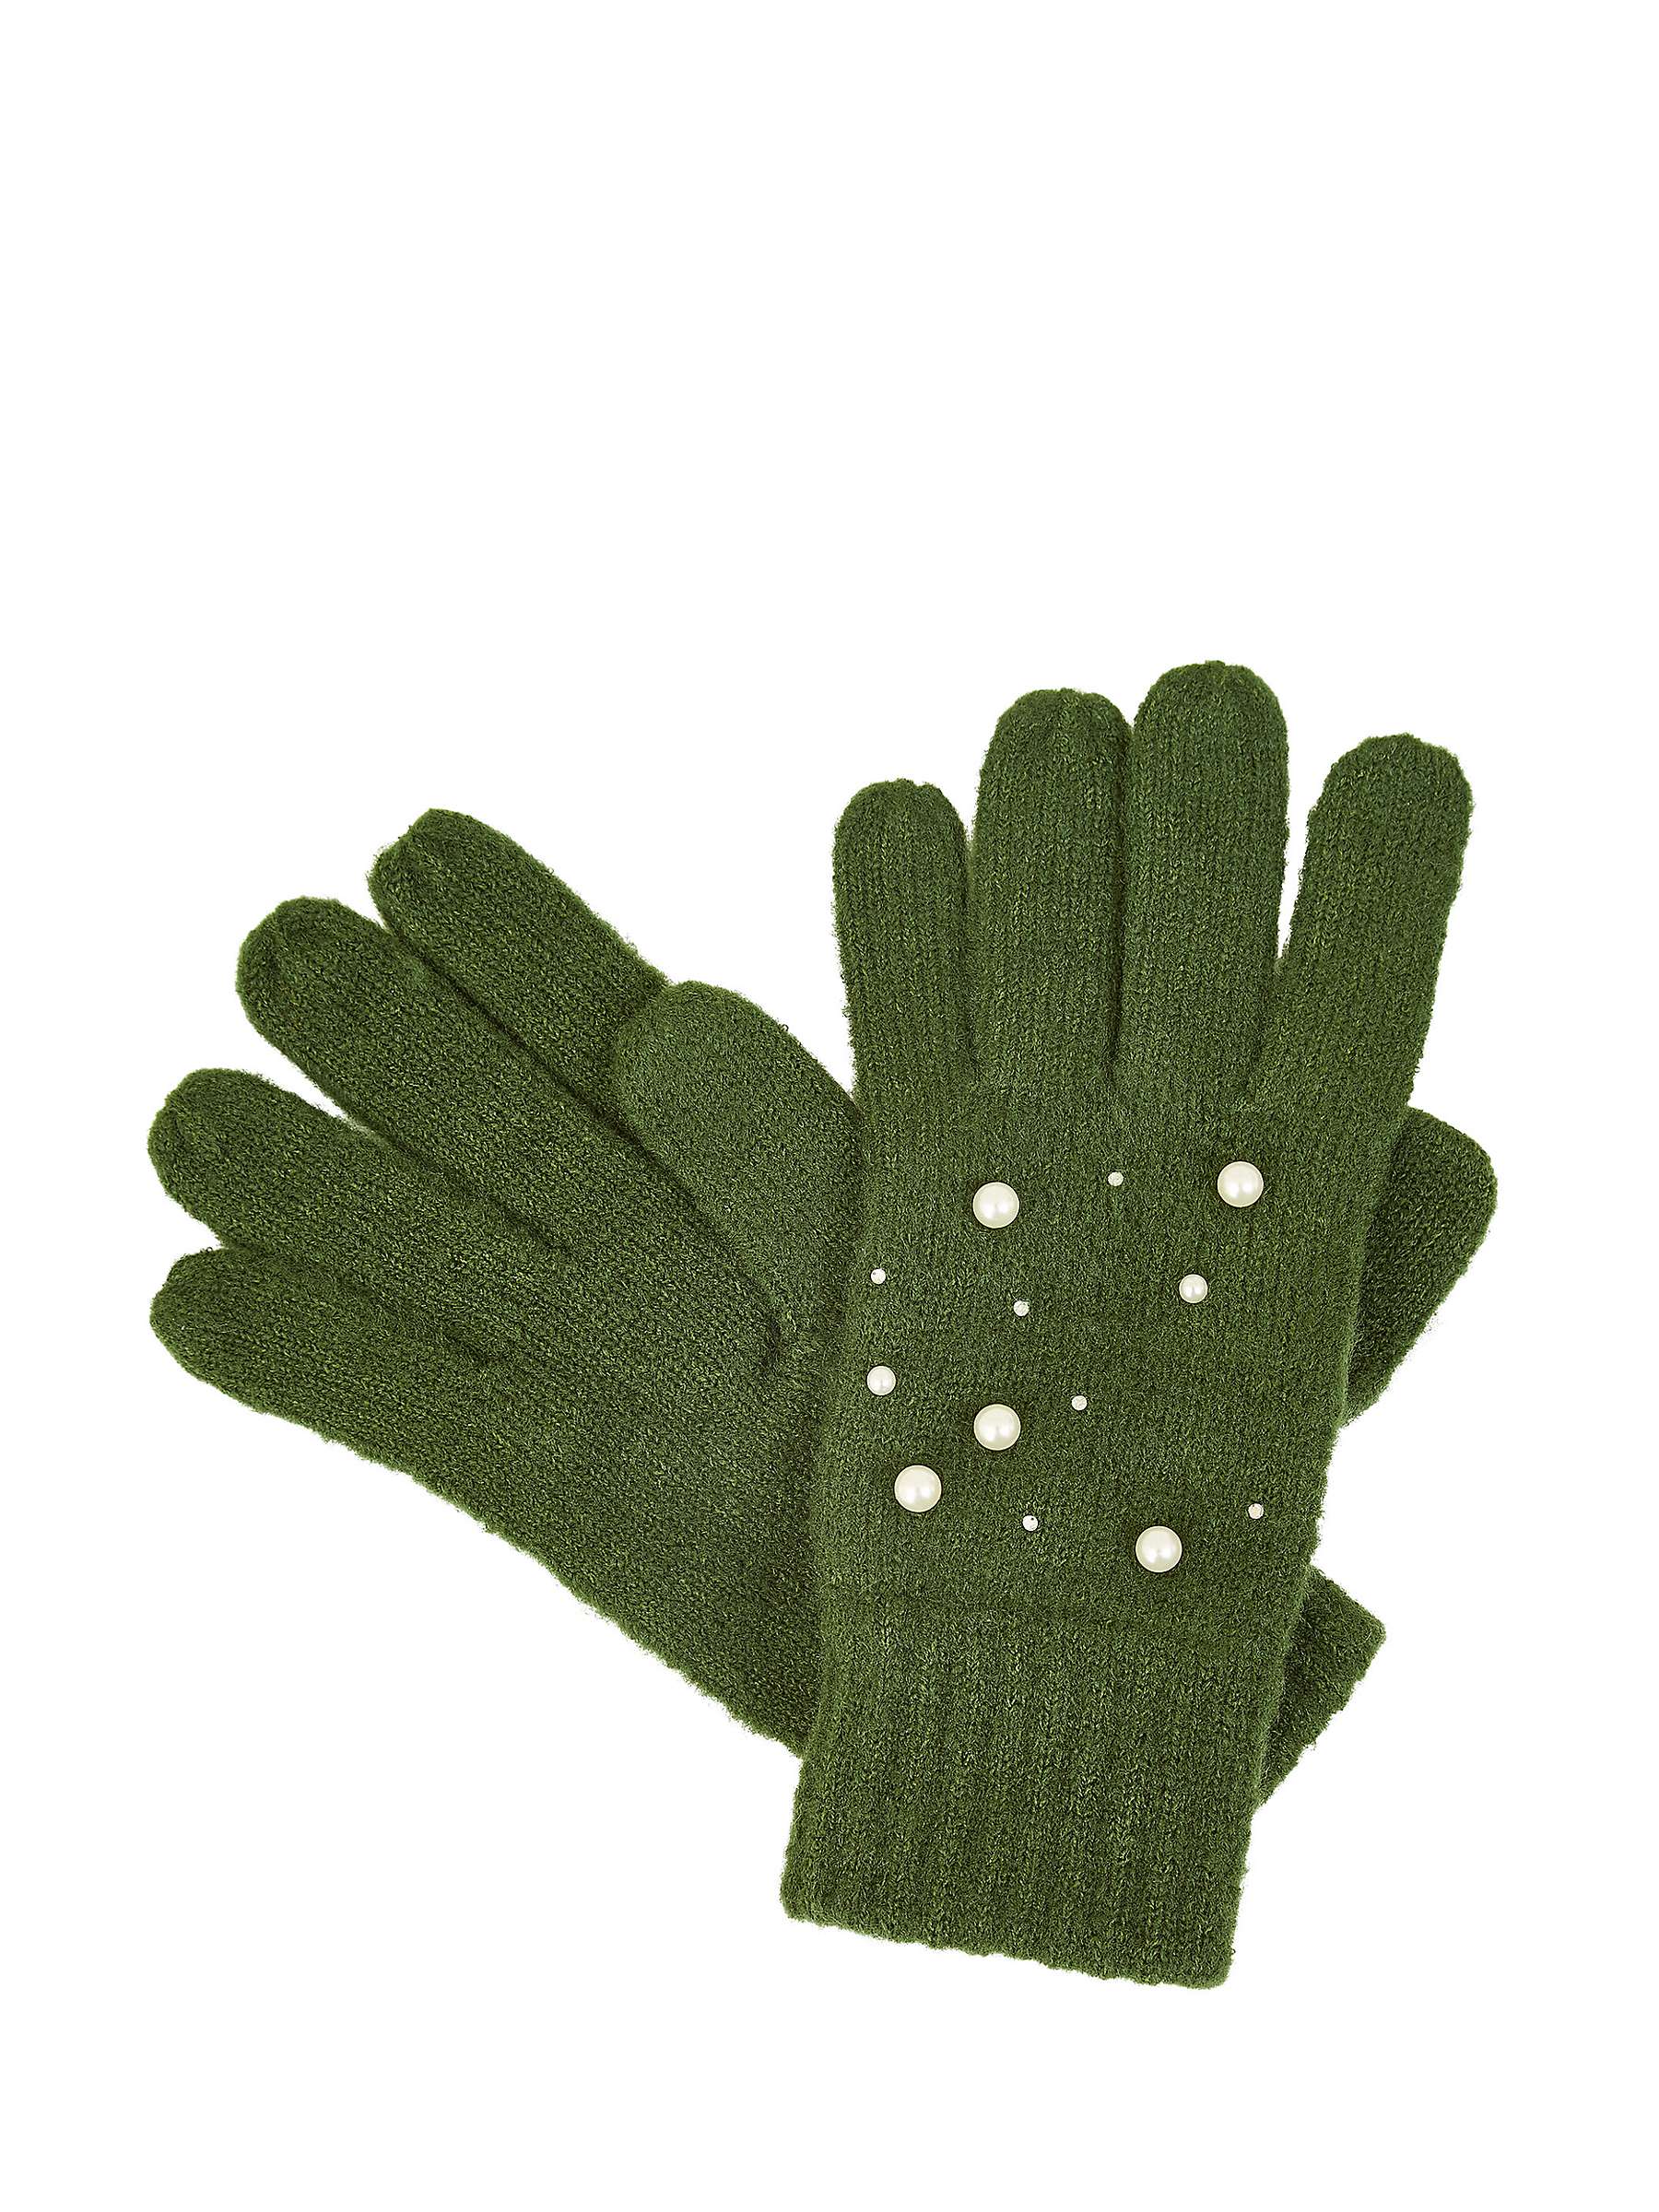 Buy Yumi Knitted Embellished Gloves Online at johnlewis.com